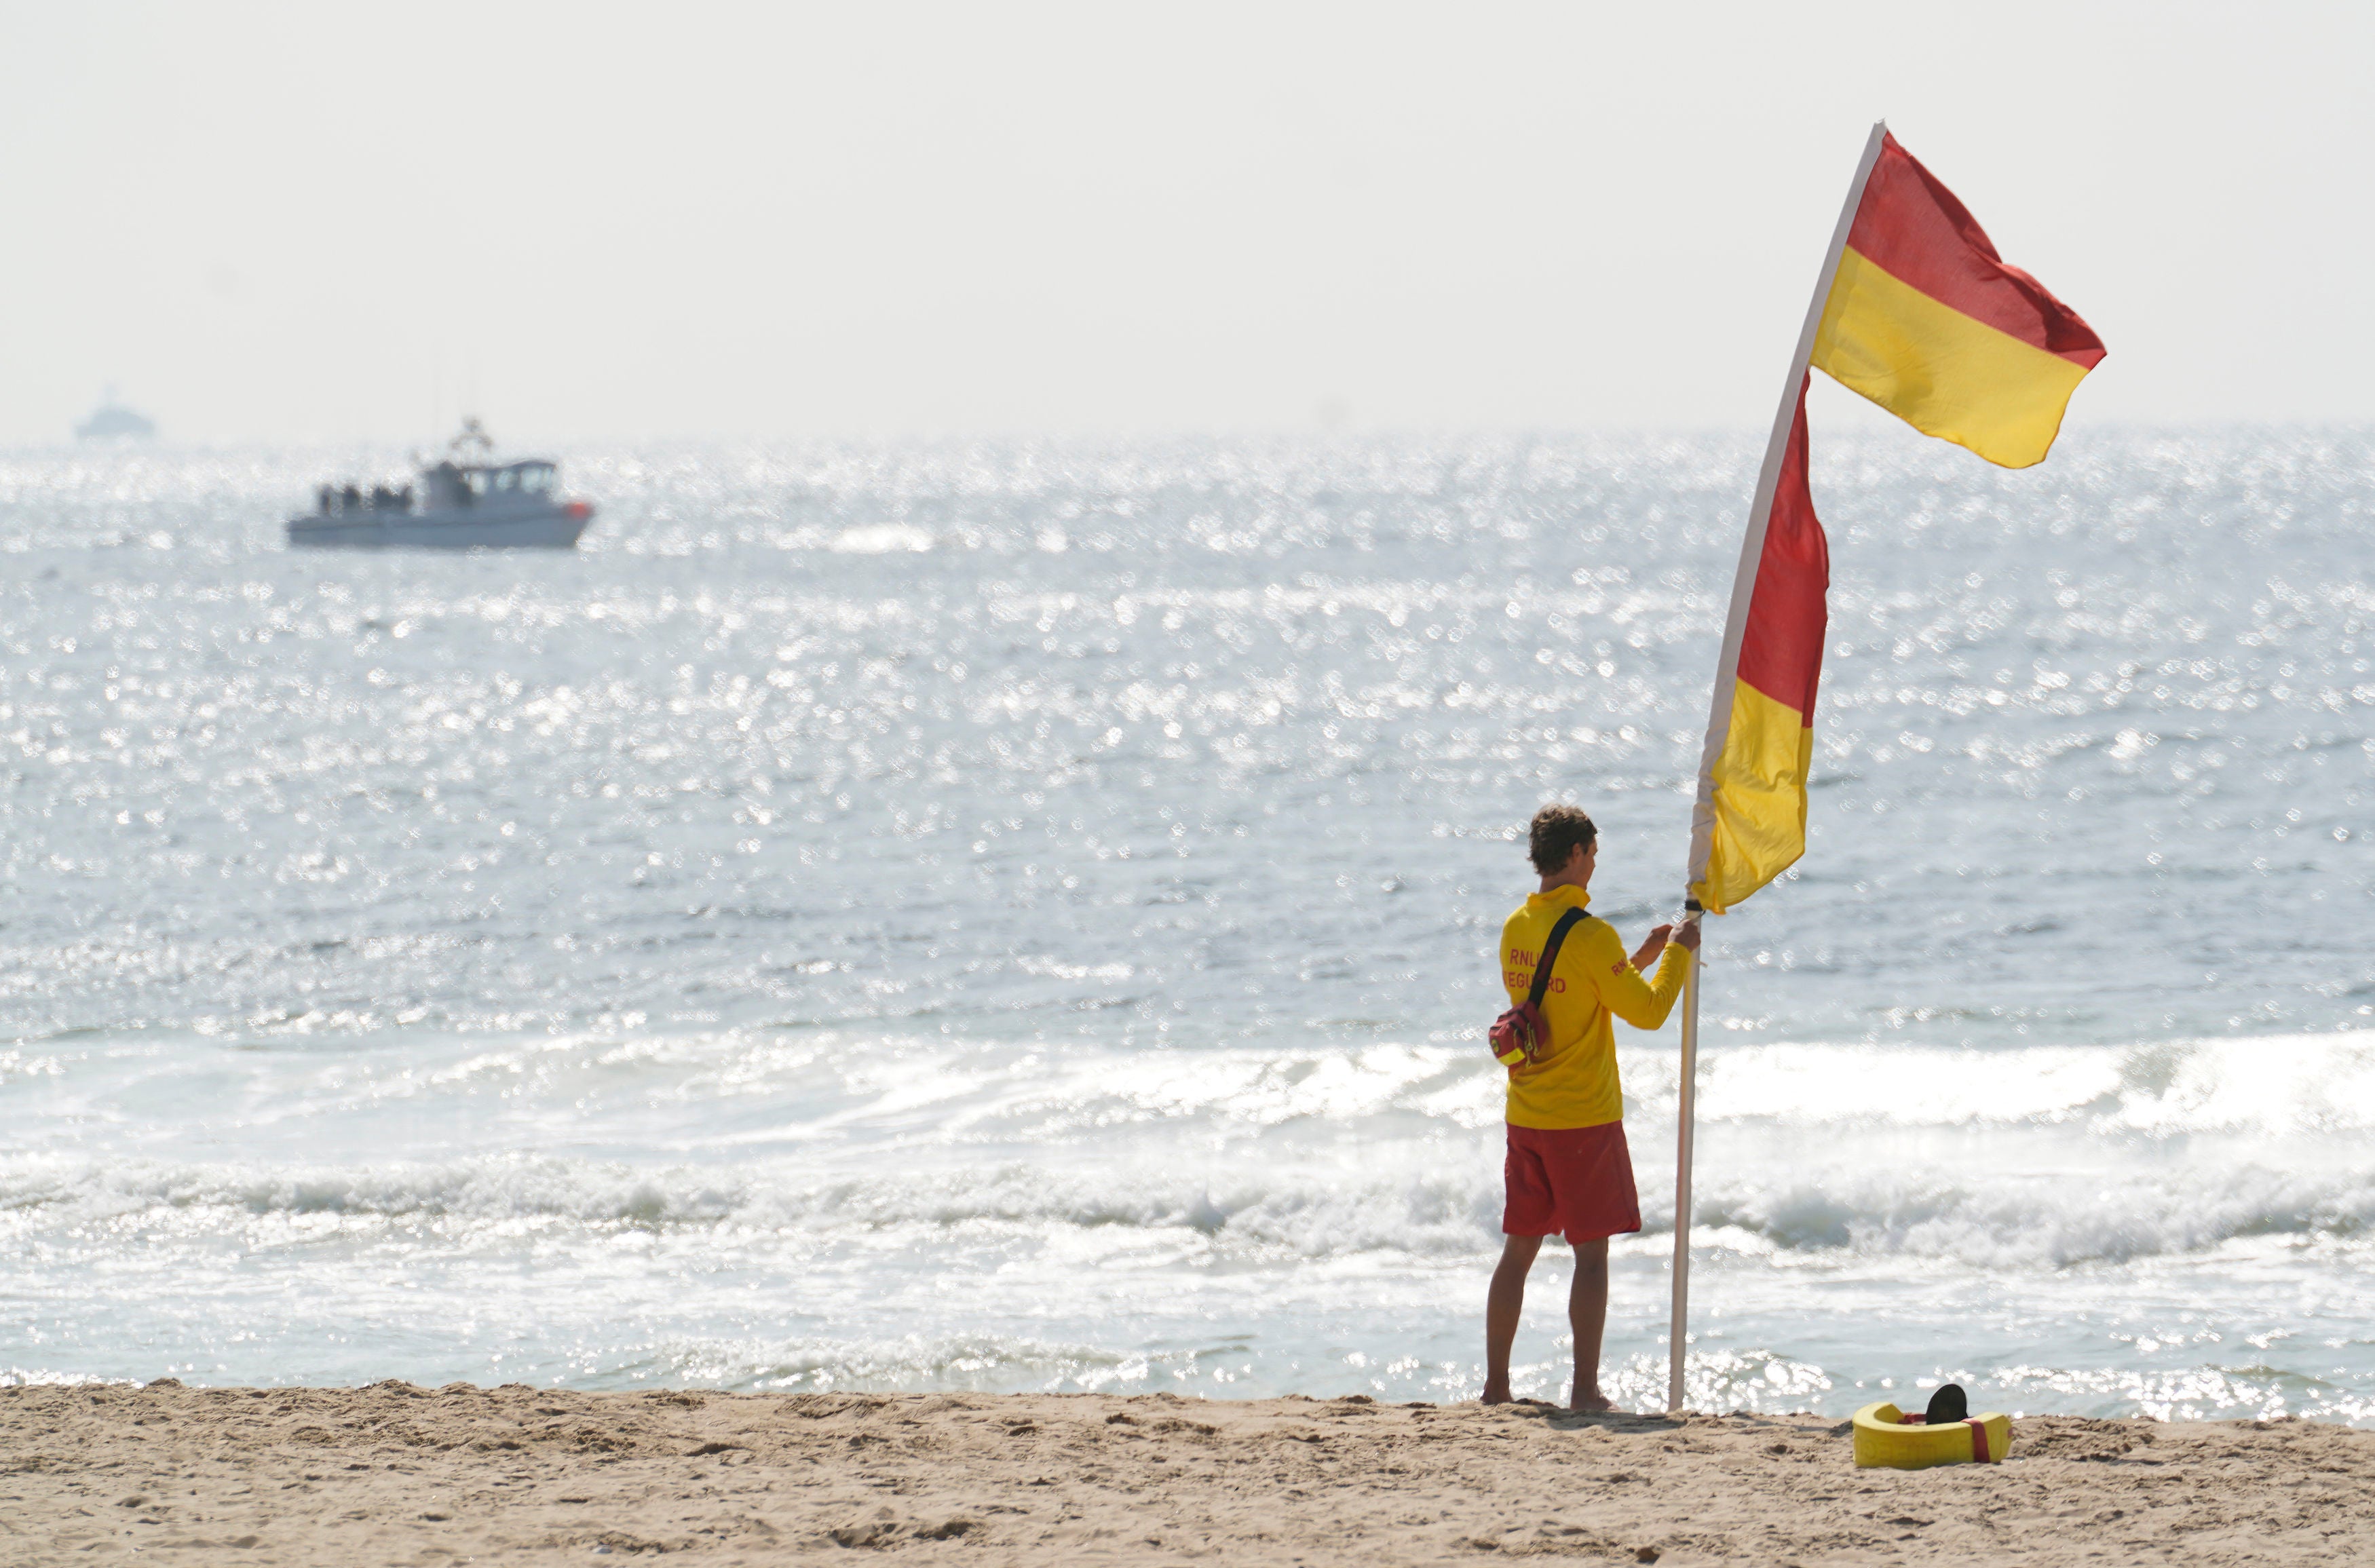 A lifeguard raises a supervised swimming flag on Bournemouth Beach a day after tragedy